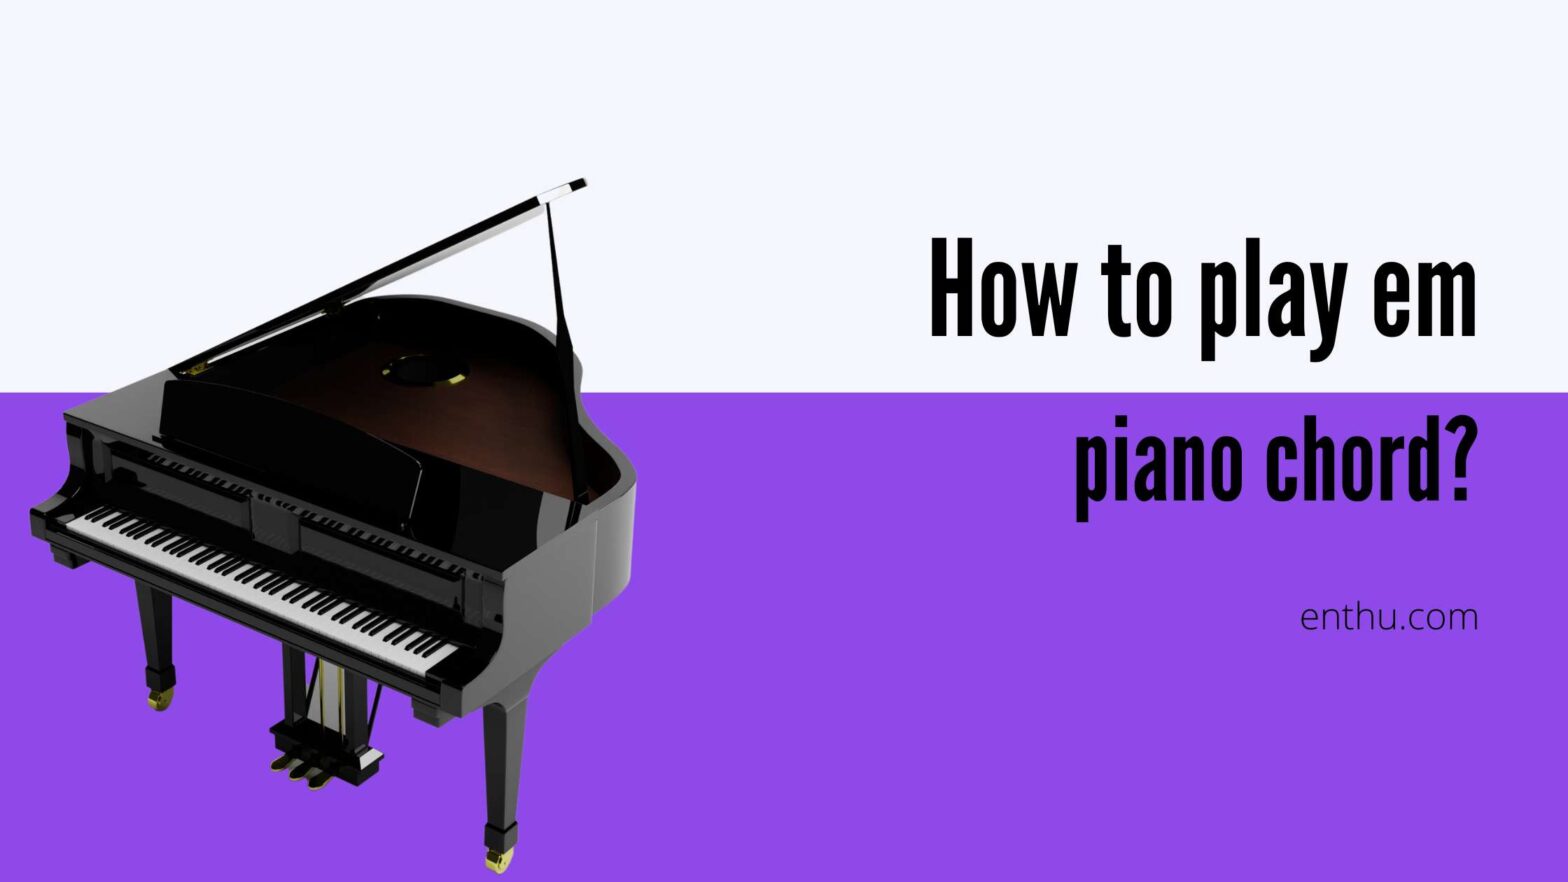 How to play em piano chord?